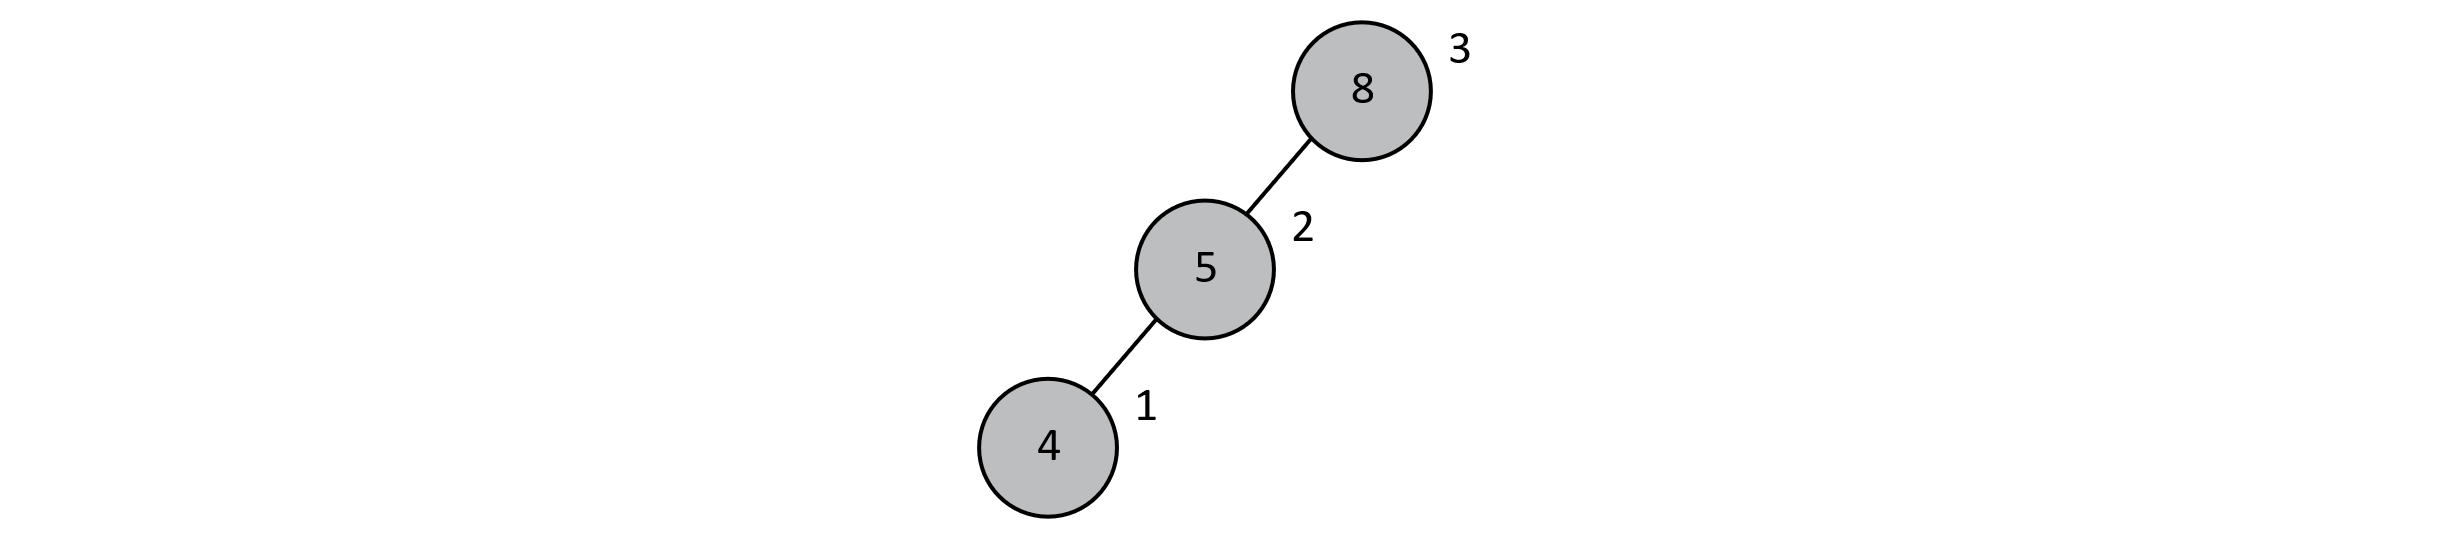 A binary search tree which has 3 nodes, each without a right child. In this case, Key 8 has left child 5. Key 5 has left child 4.